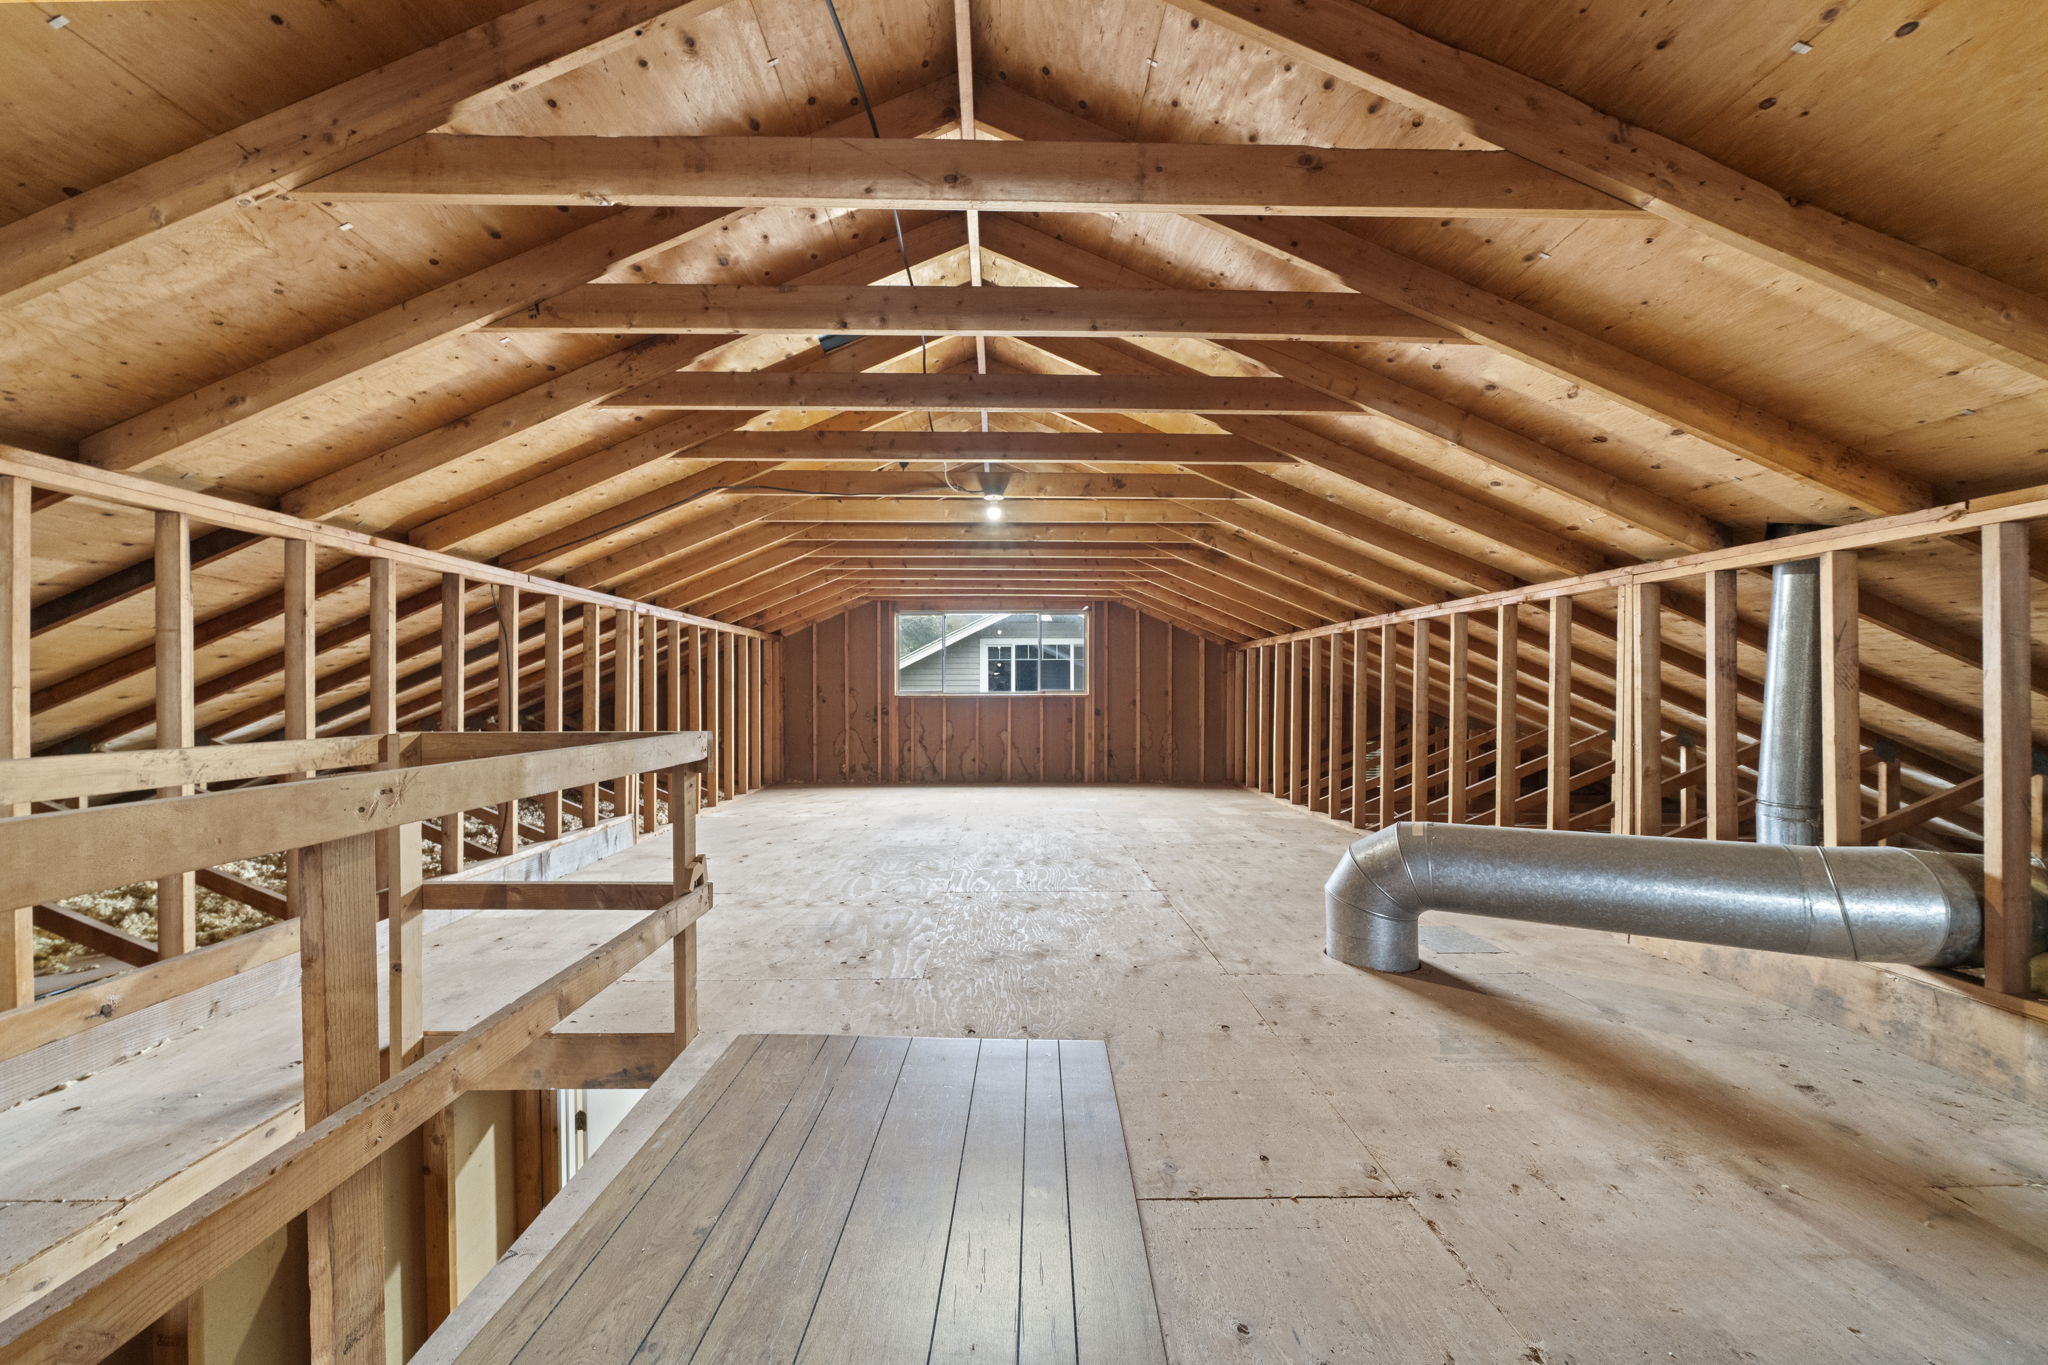 Check out the amazing un-finished attic space!